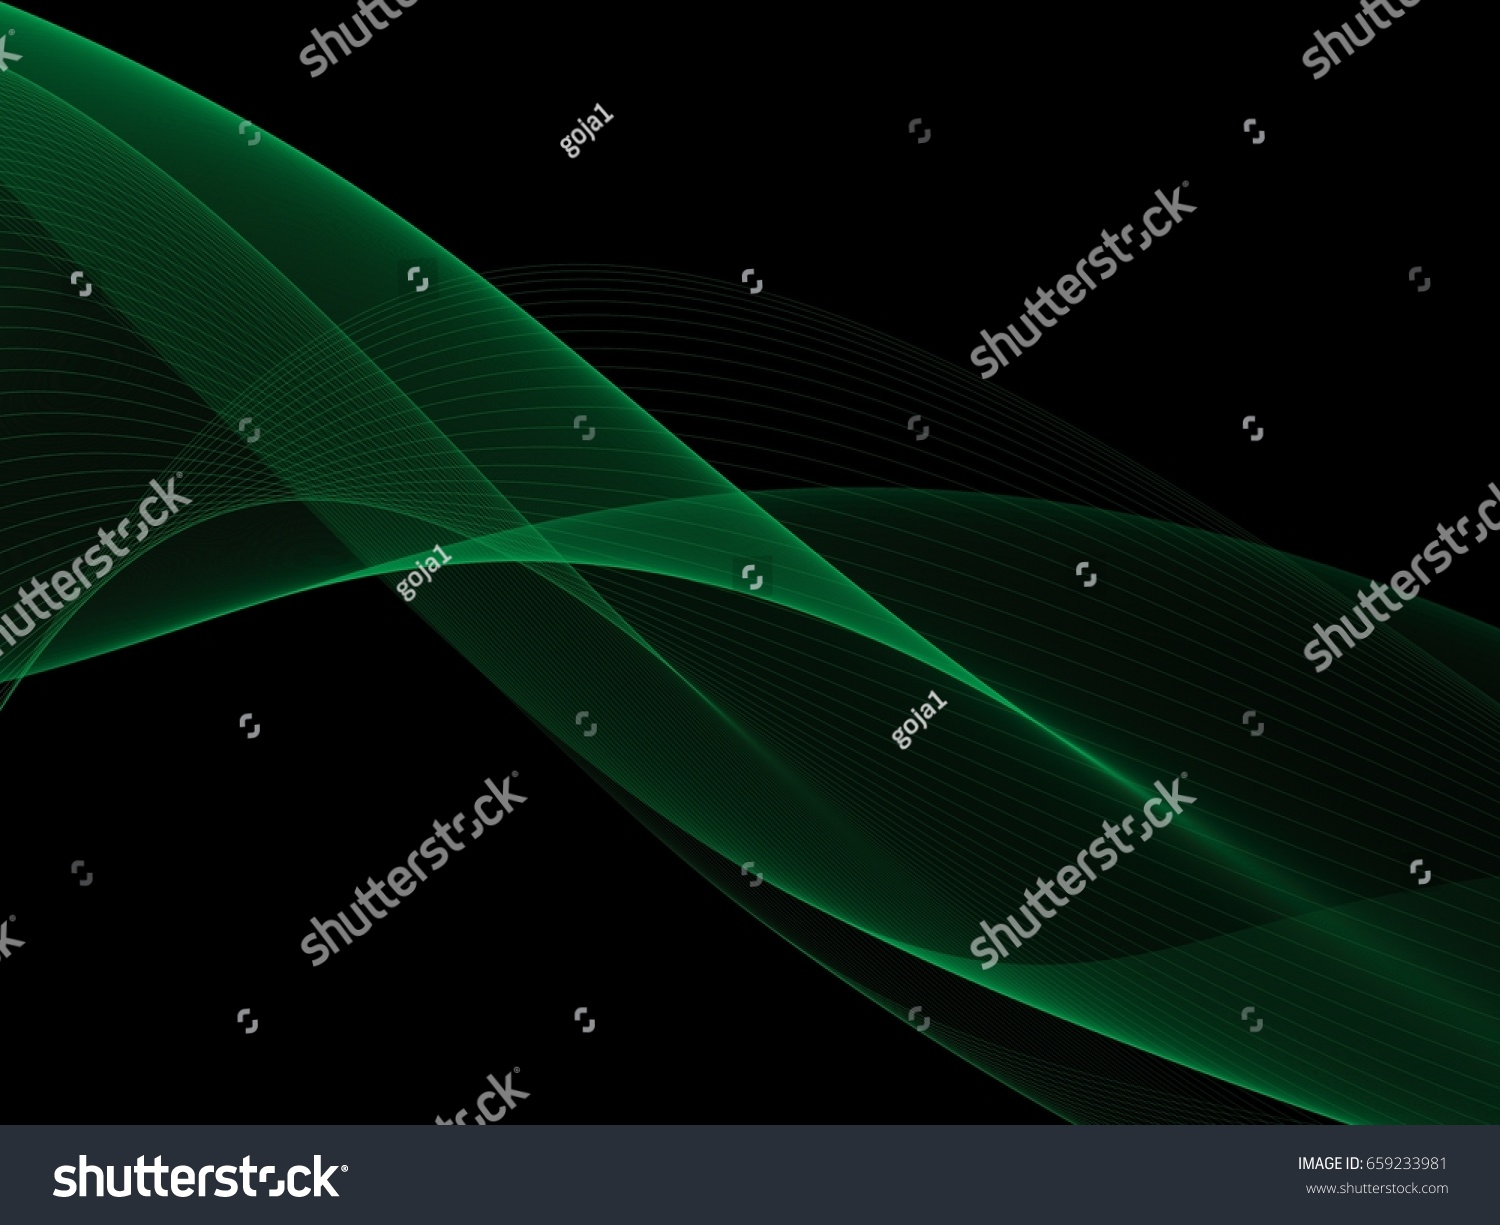 Abstract Graphic Art Wallpaper Background Computer Stock